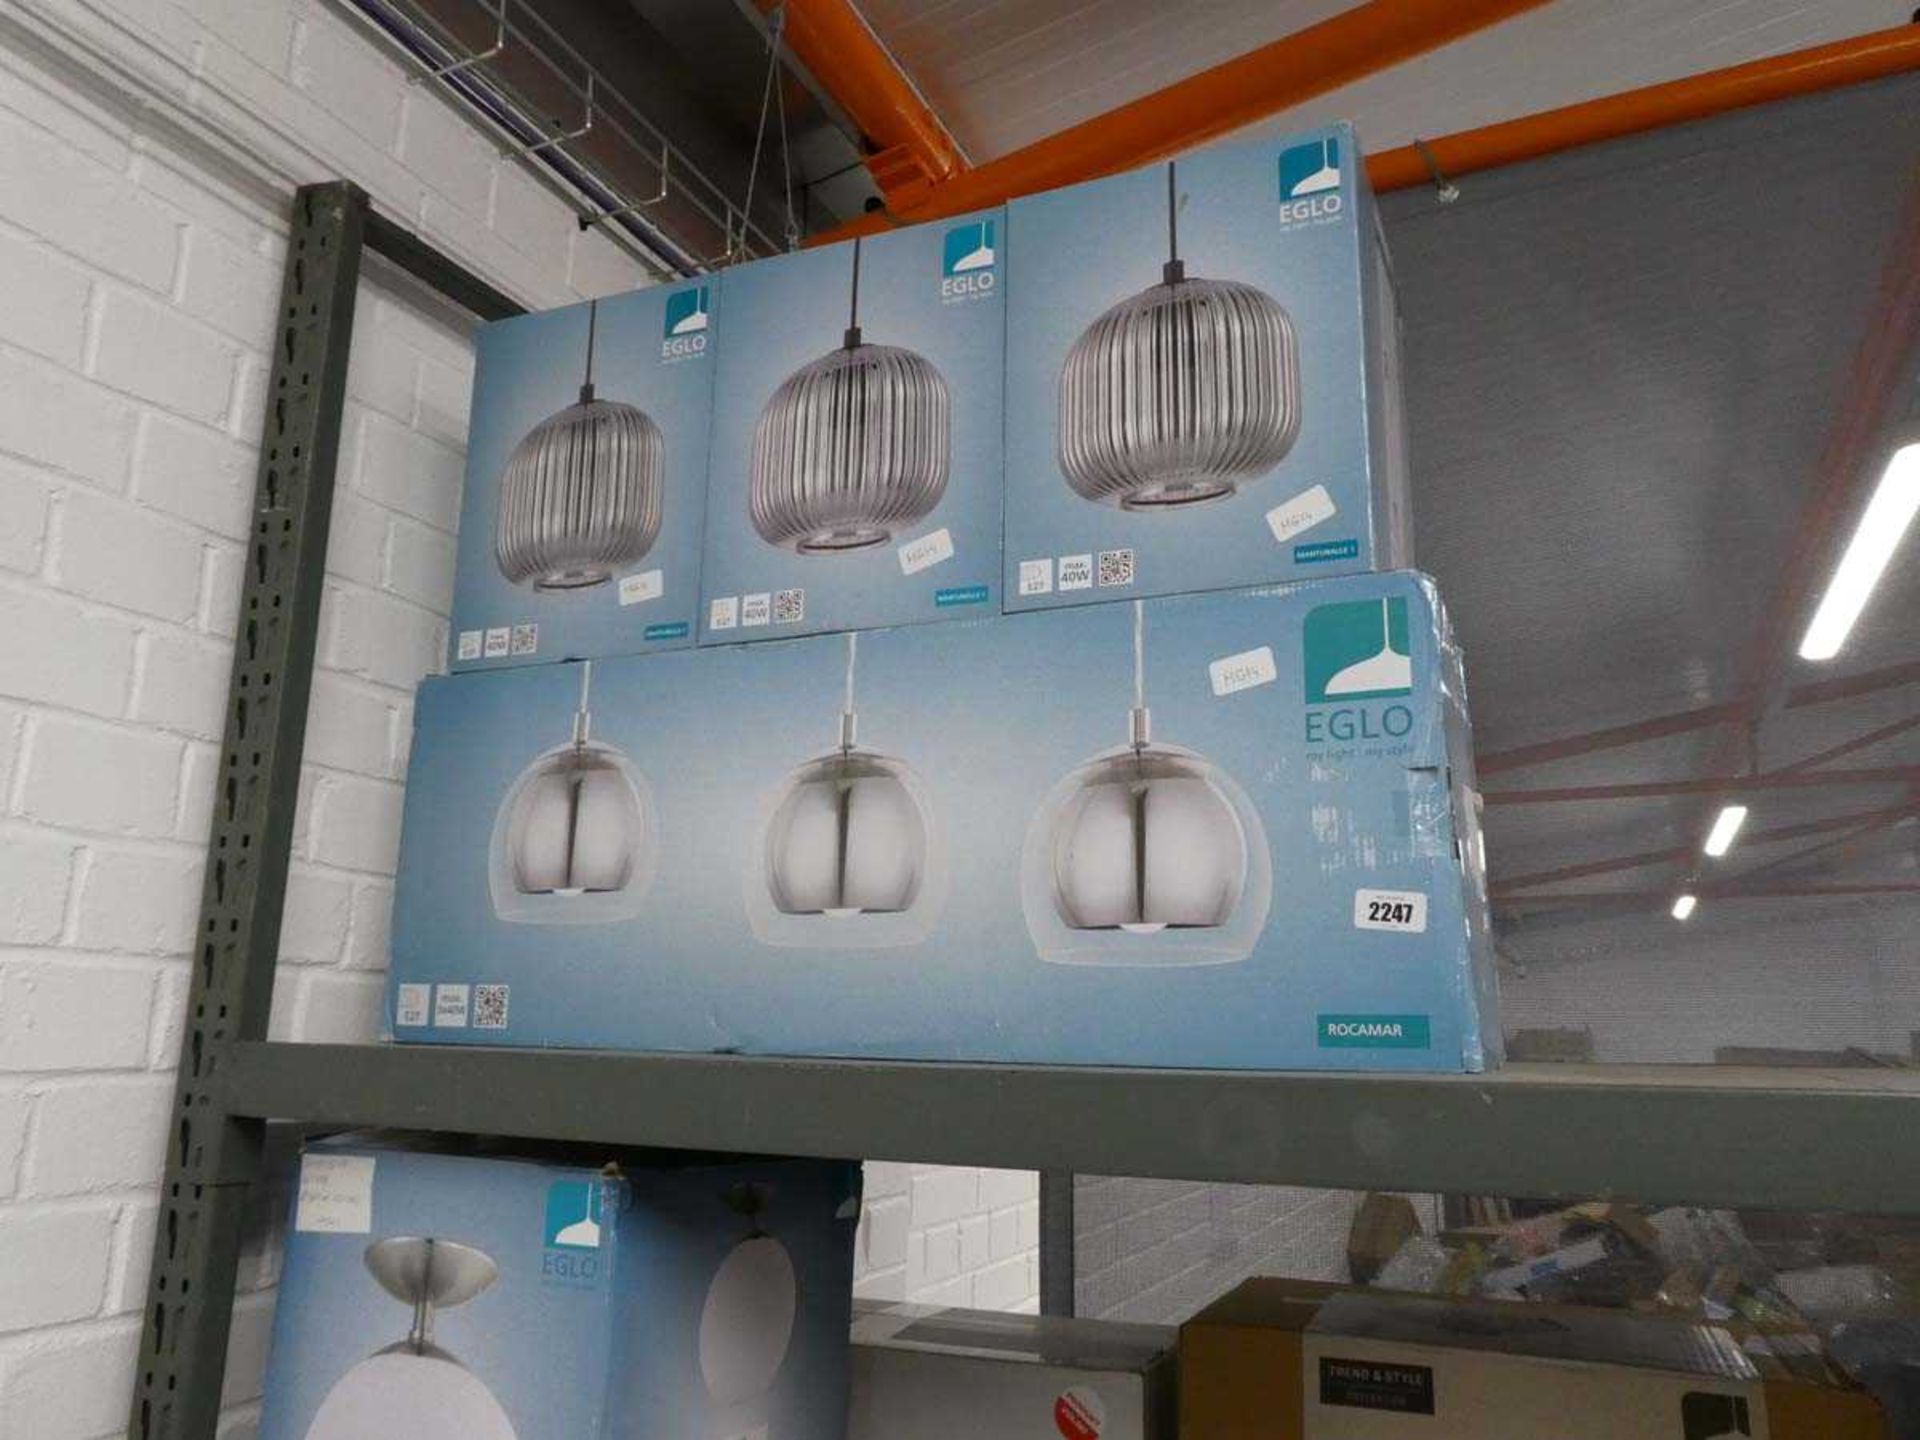 Boxed Eglo 3 section pendant light with 3 boxed Eglo hanging pendant lights in grey